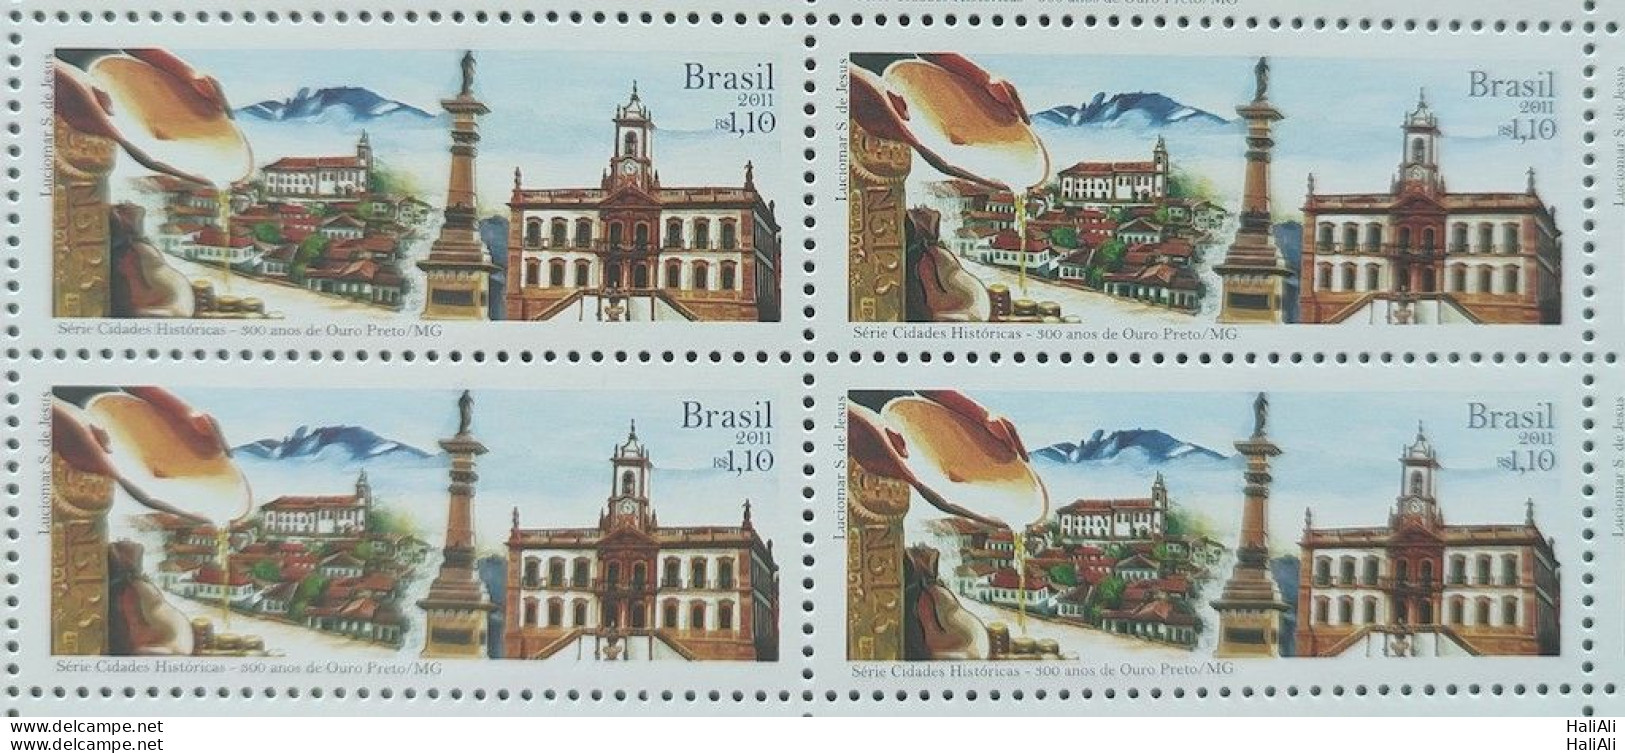 C 3097 Brazil Stamp Historical Cities Ouro Preto MG 2011 Block Of 4 - Unused Stamps